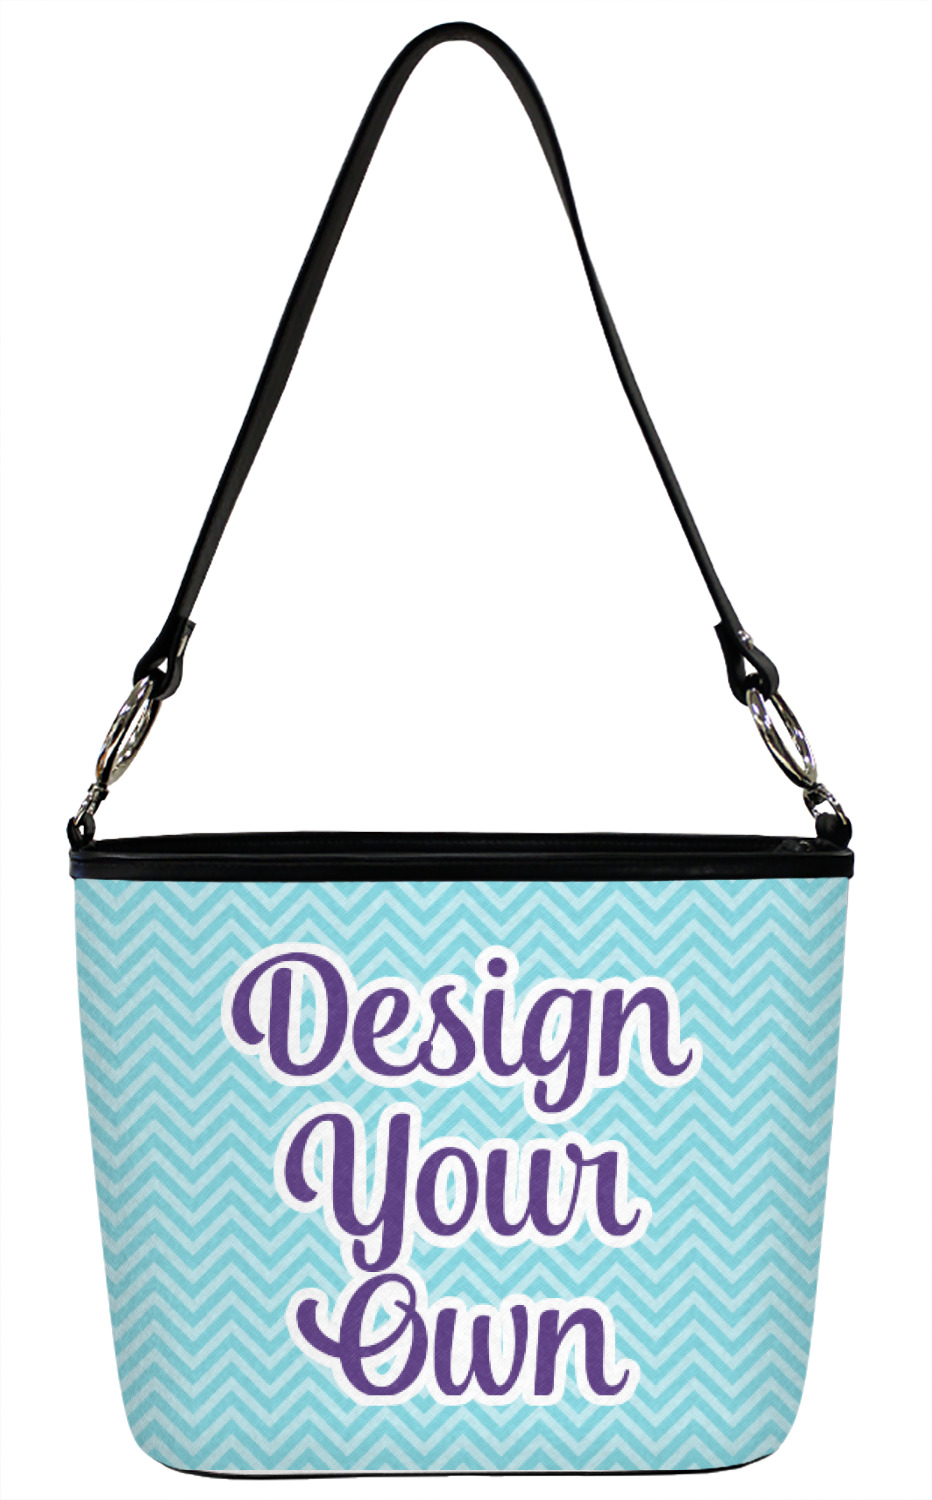 Anchors & Argyle Bucket Tote w/Genuine Leather Trim Large w/Front & Back Design Personalized